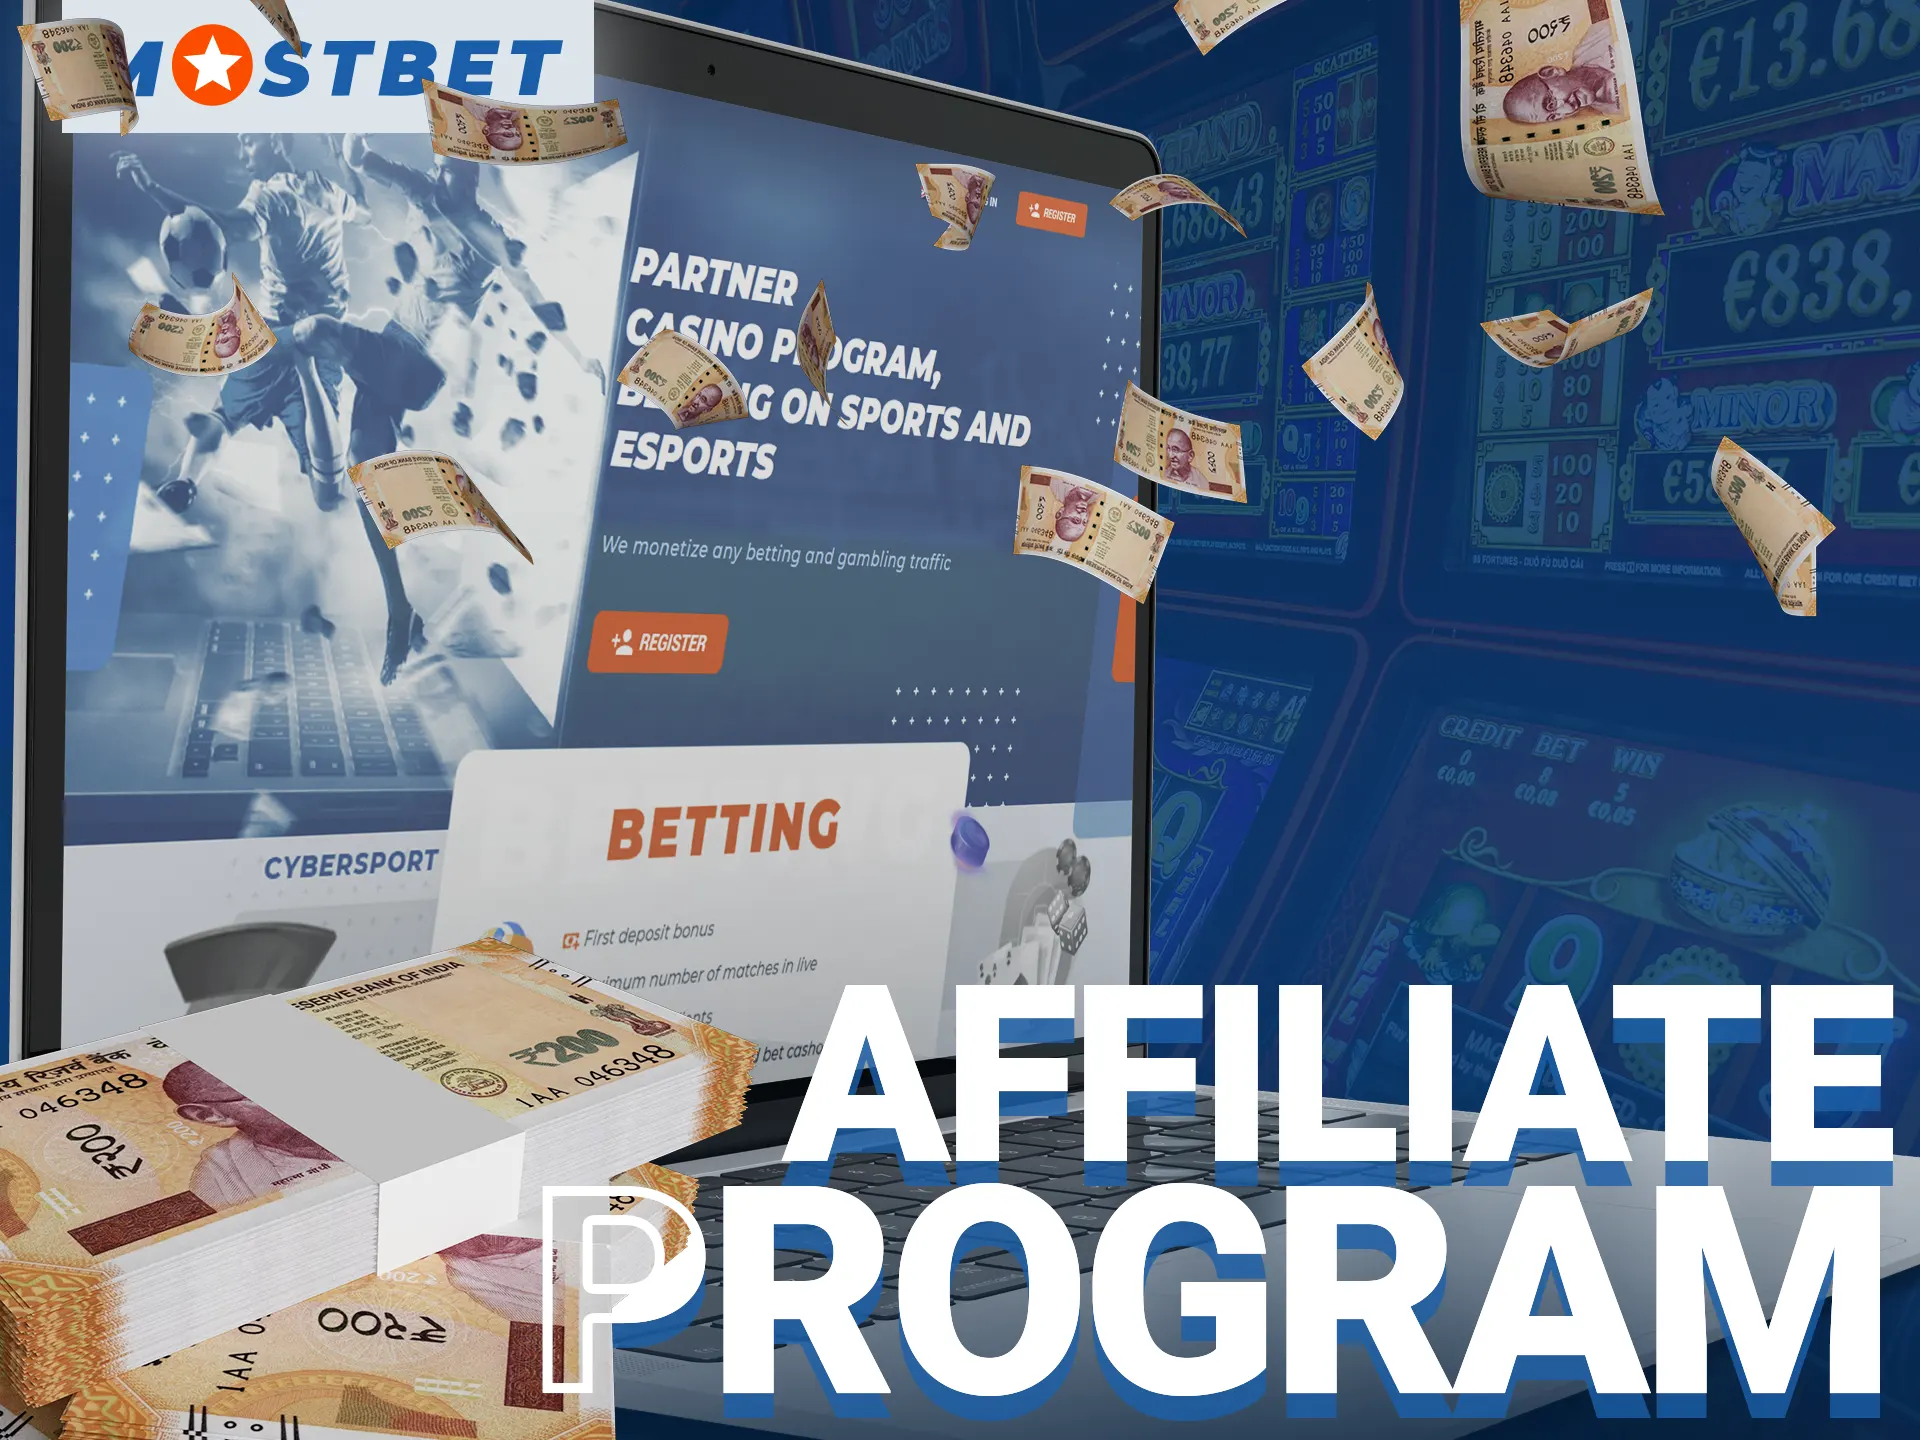 You can advertise Mostbet services on your website or social networks by joining the affiliate program.